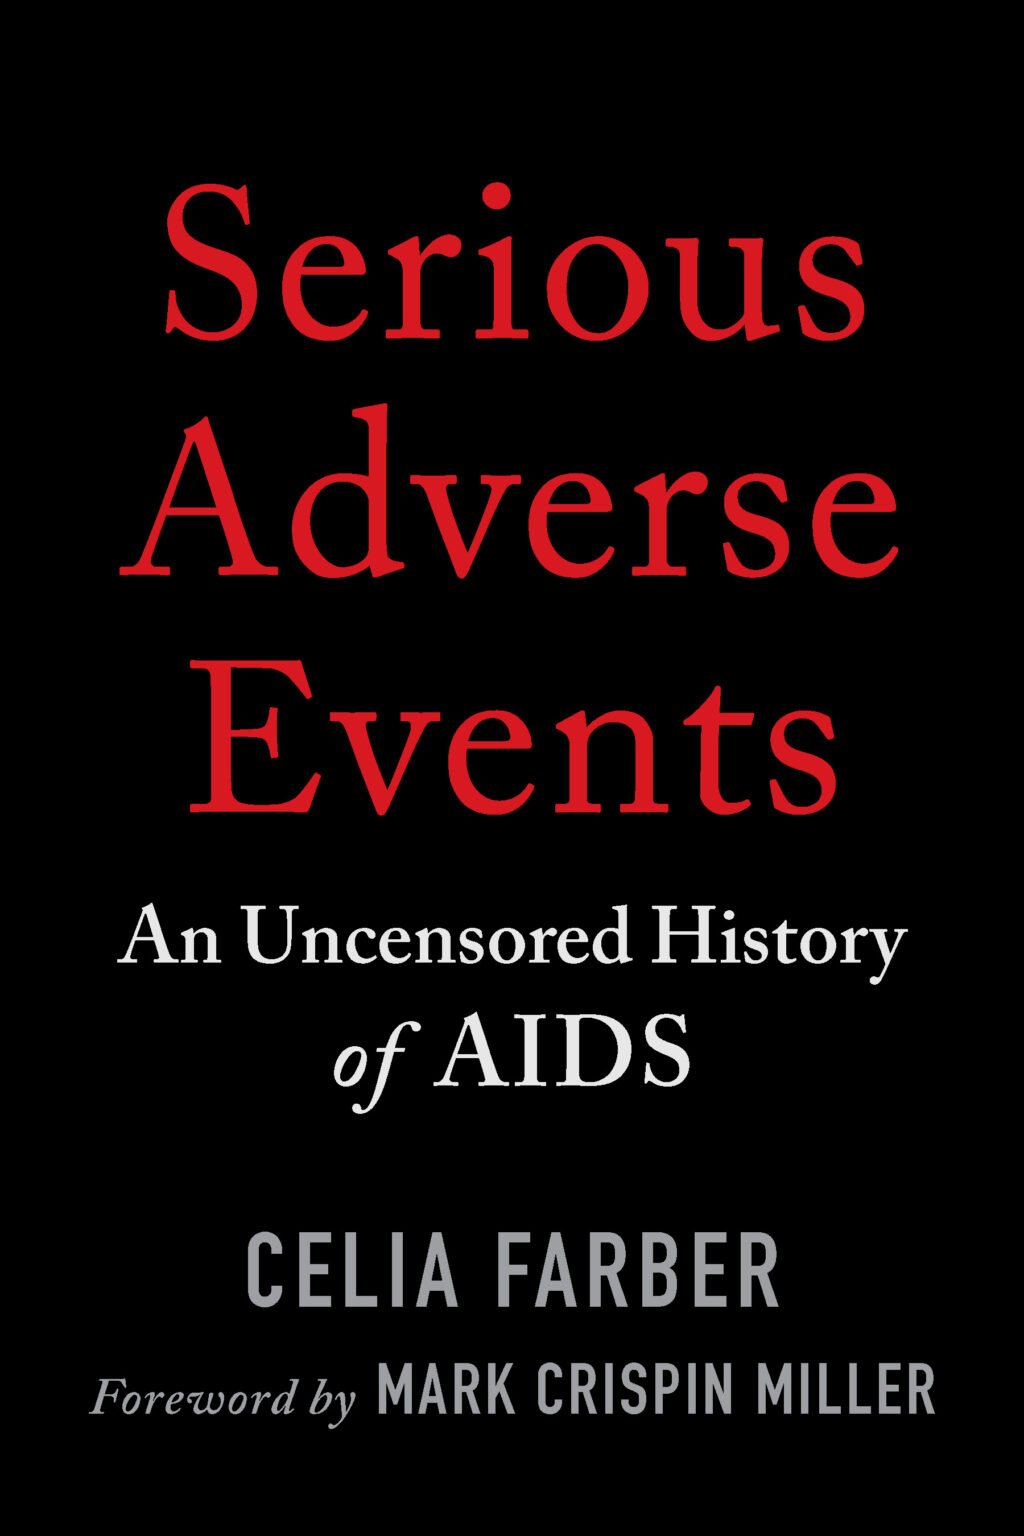 The Serious Adverse Events cover